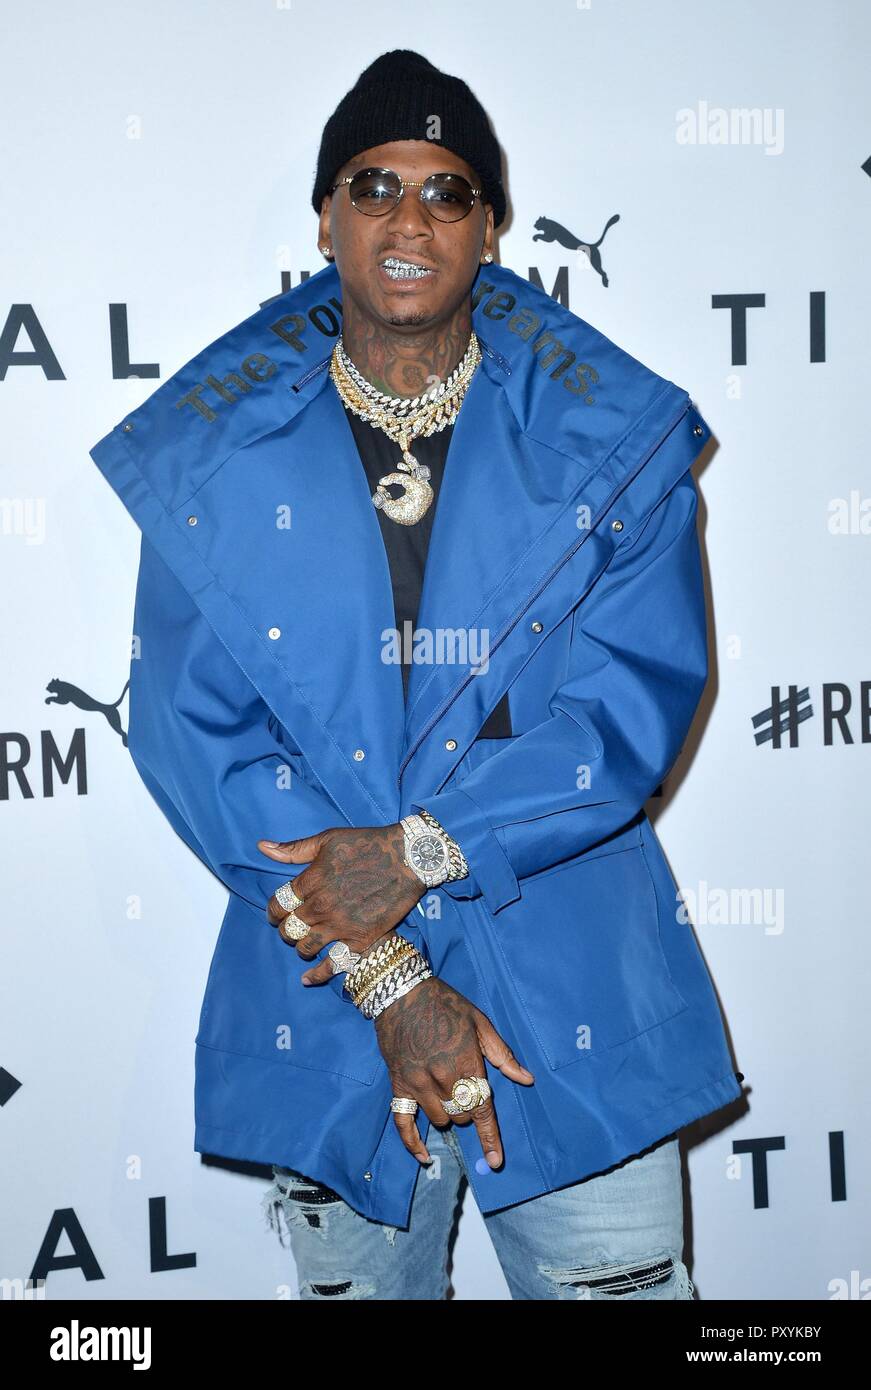 Moneybagg Yo Outfit from January 7, 2023